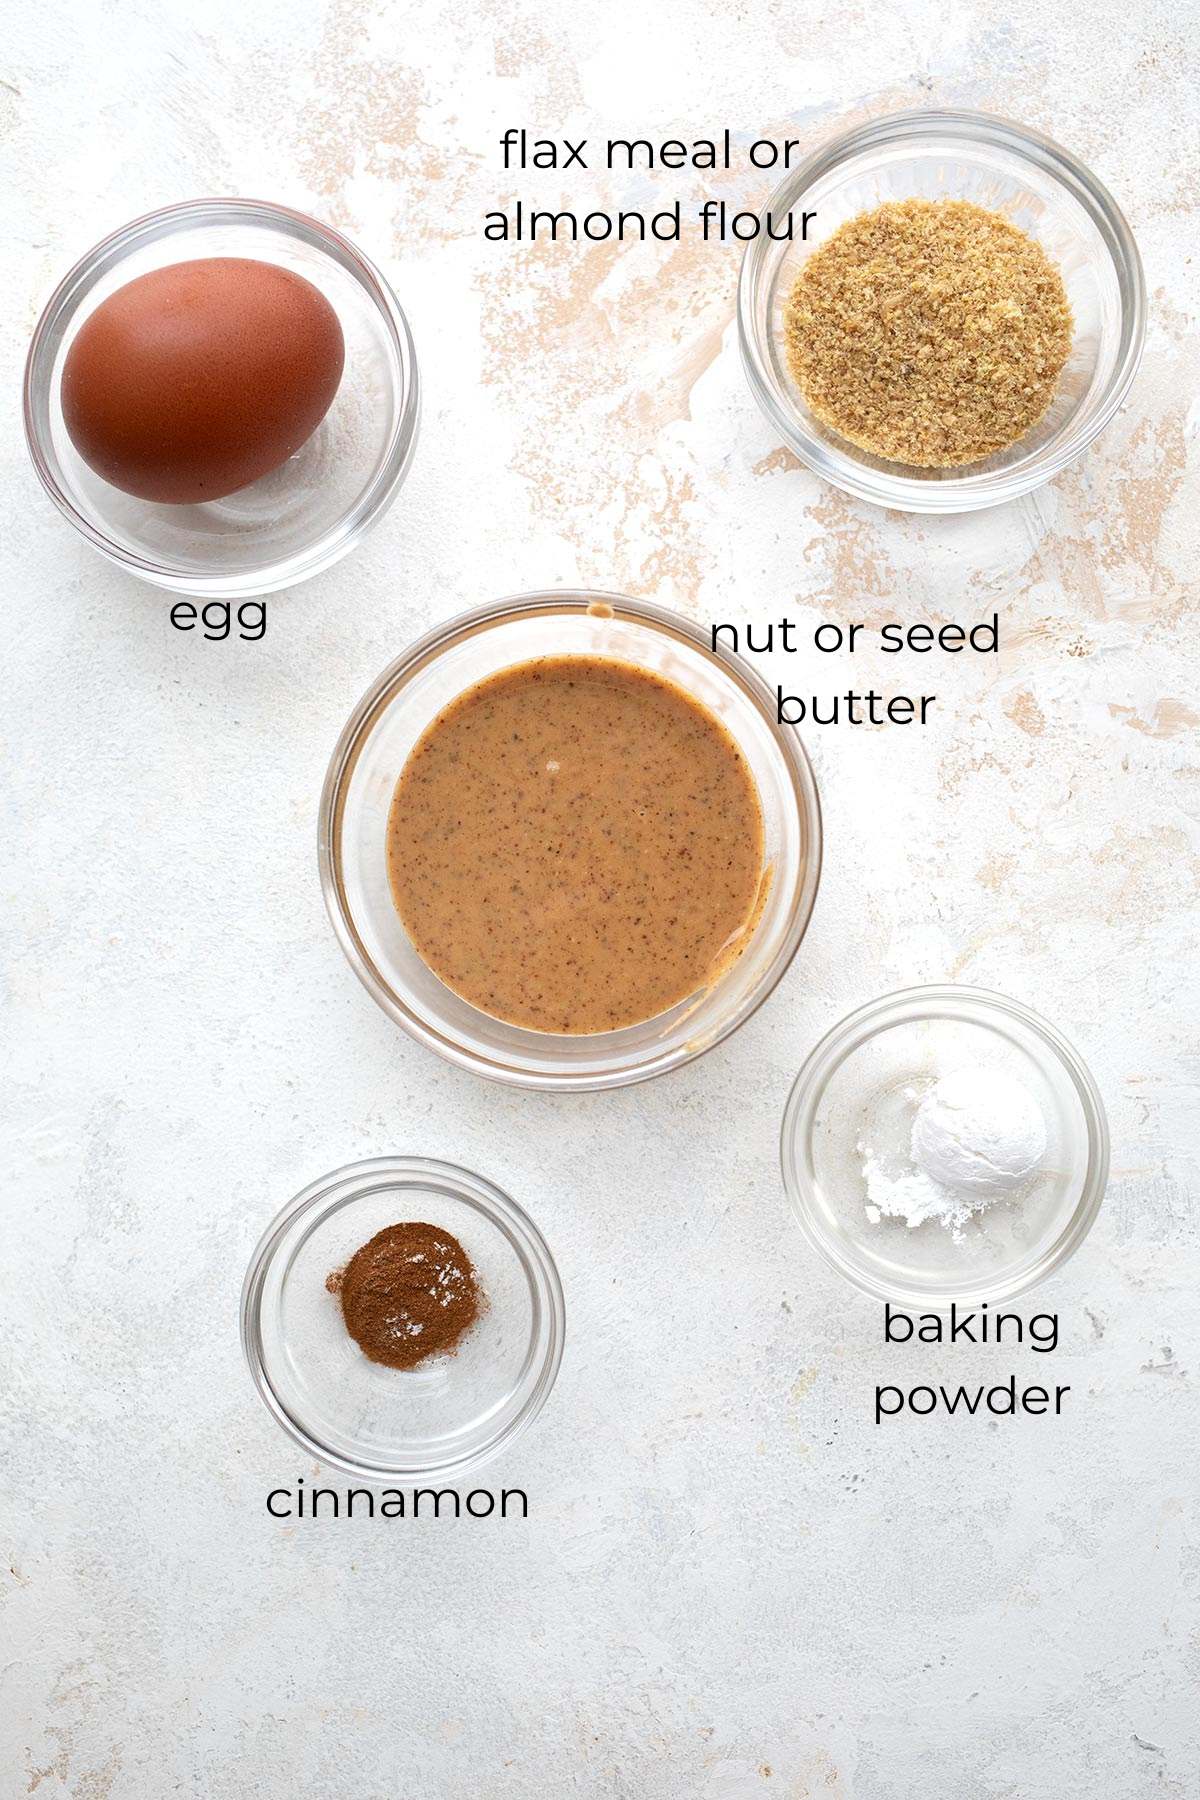 Top down image of ingredients needed for Low Carb English Muffins.